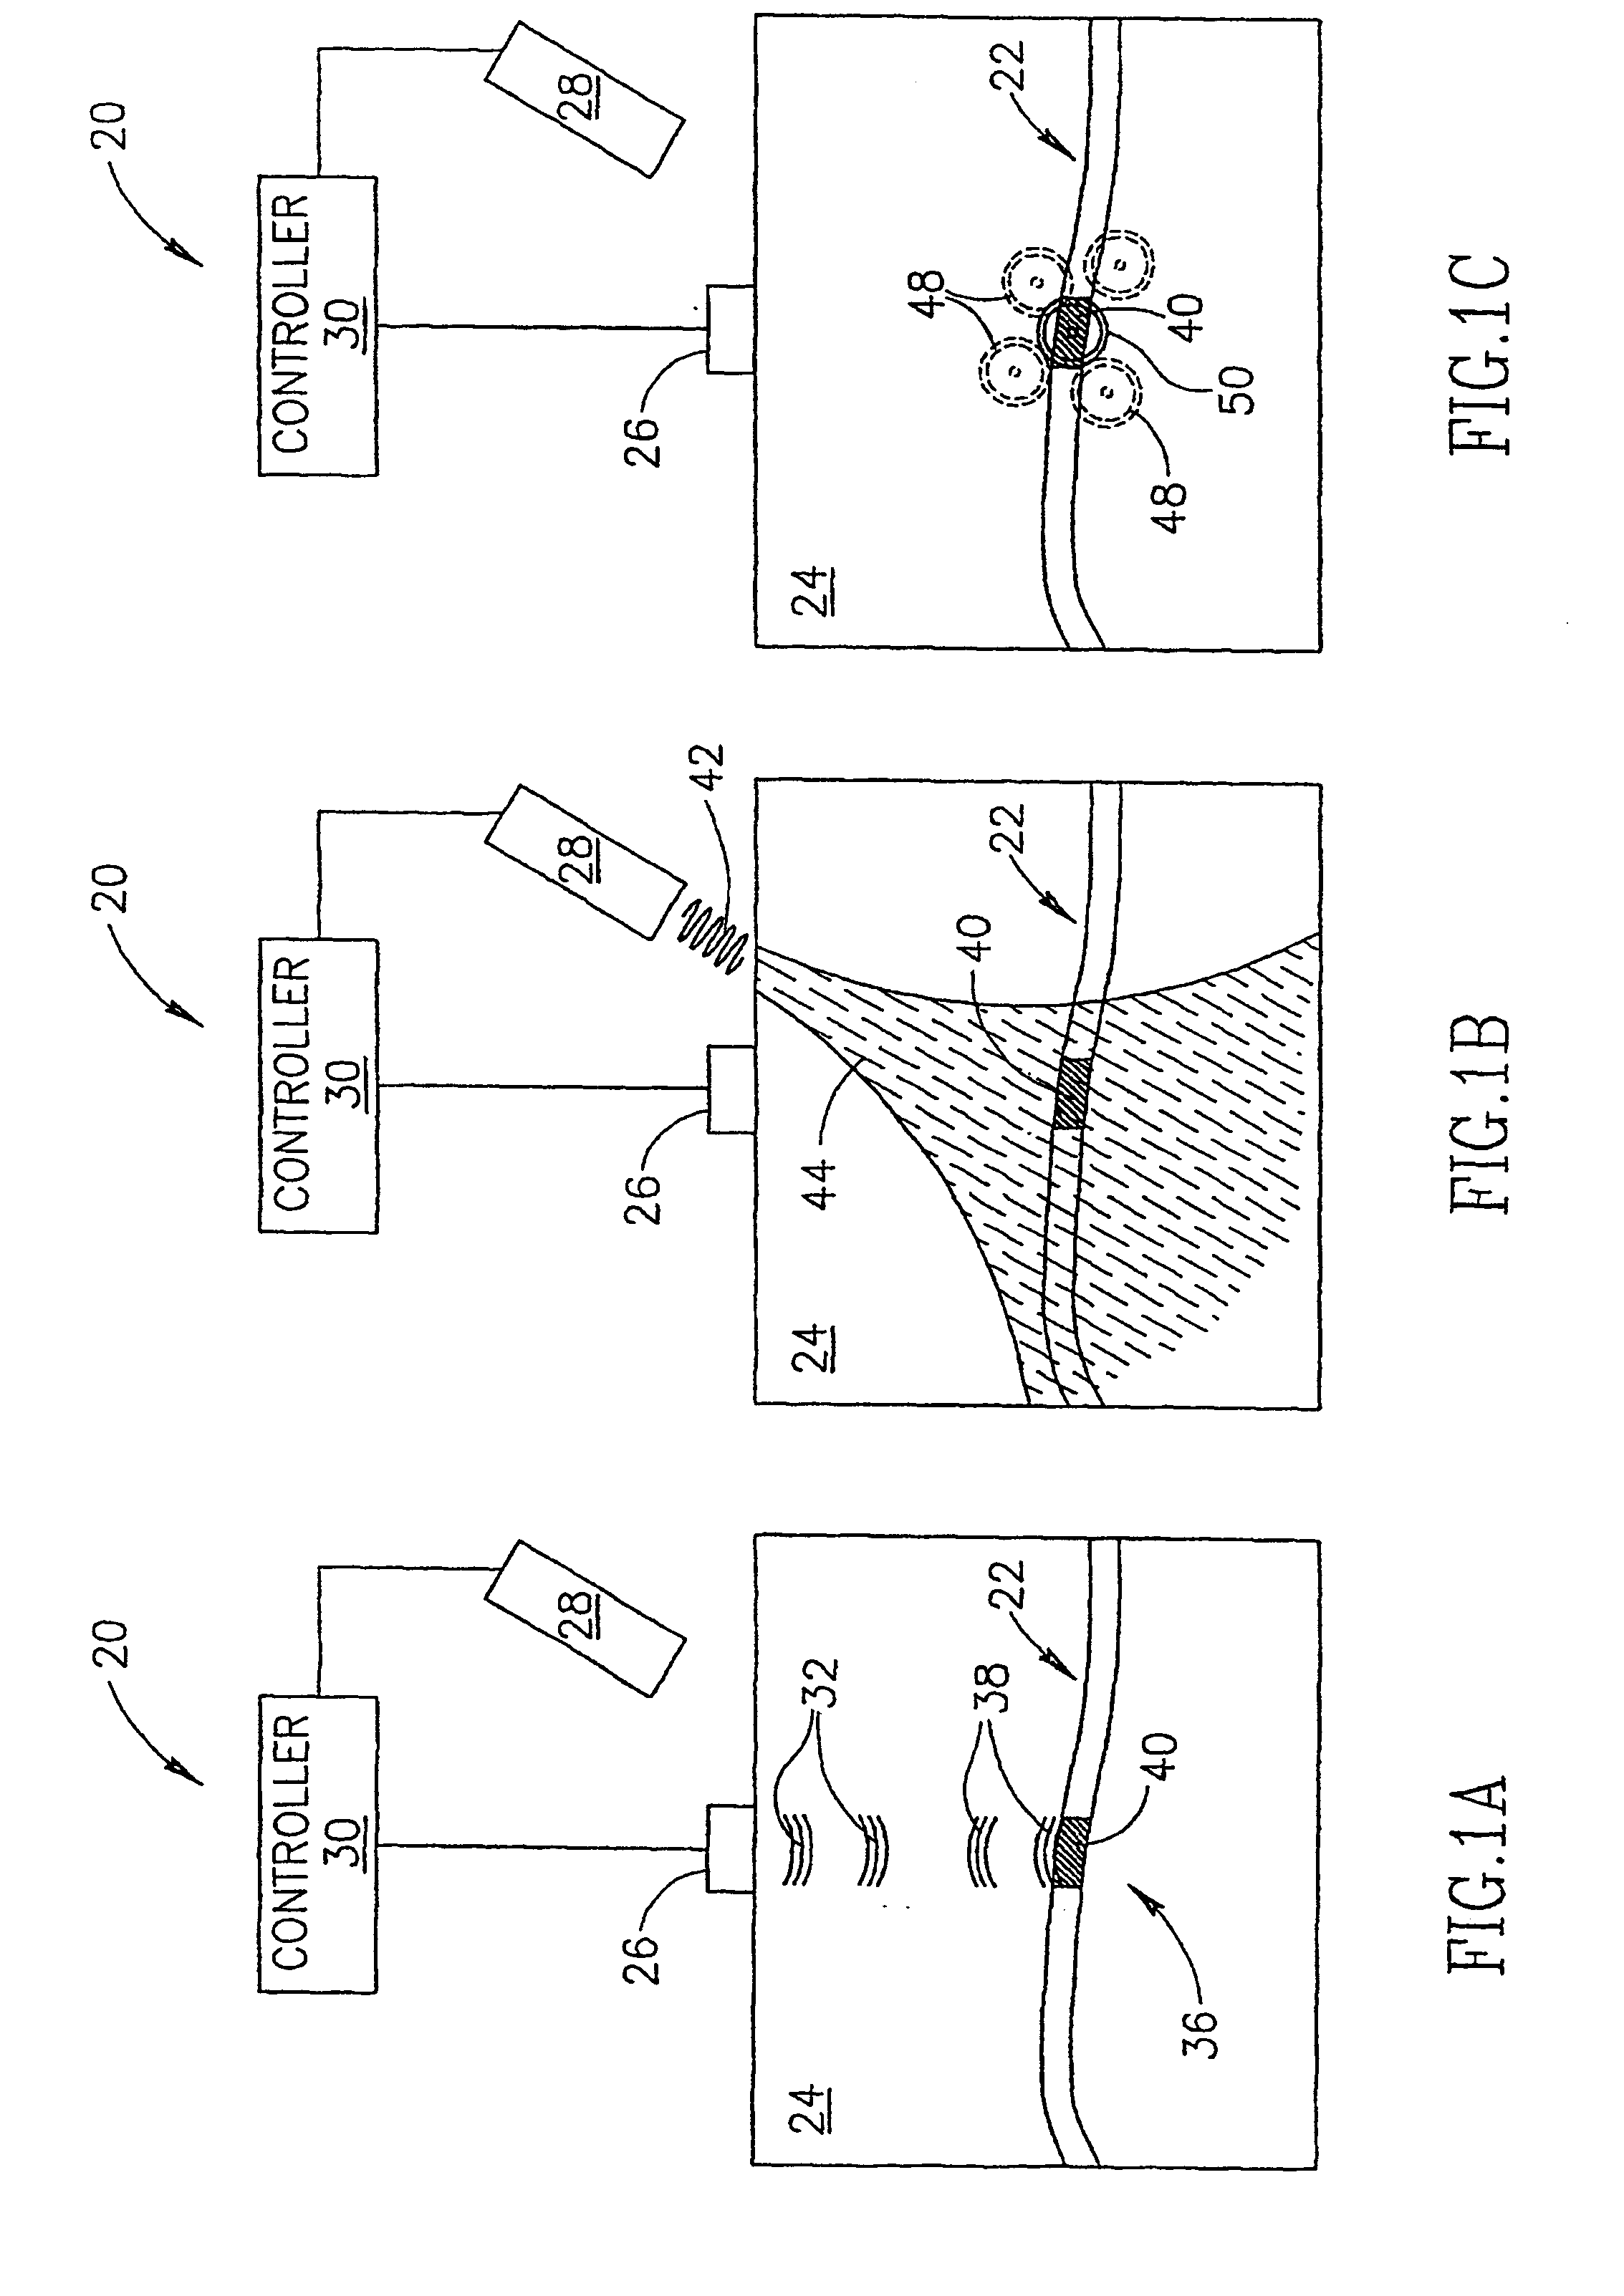 Photoacoustic assay and imaging system